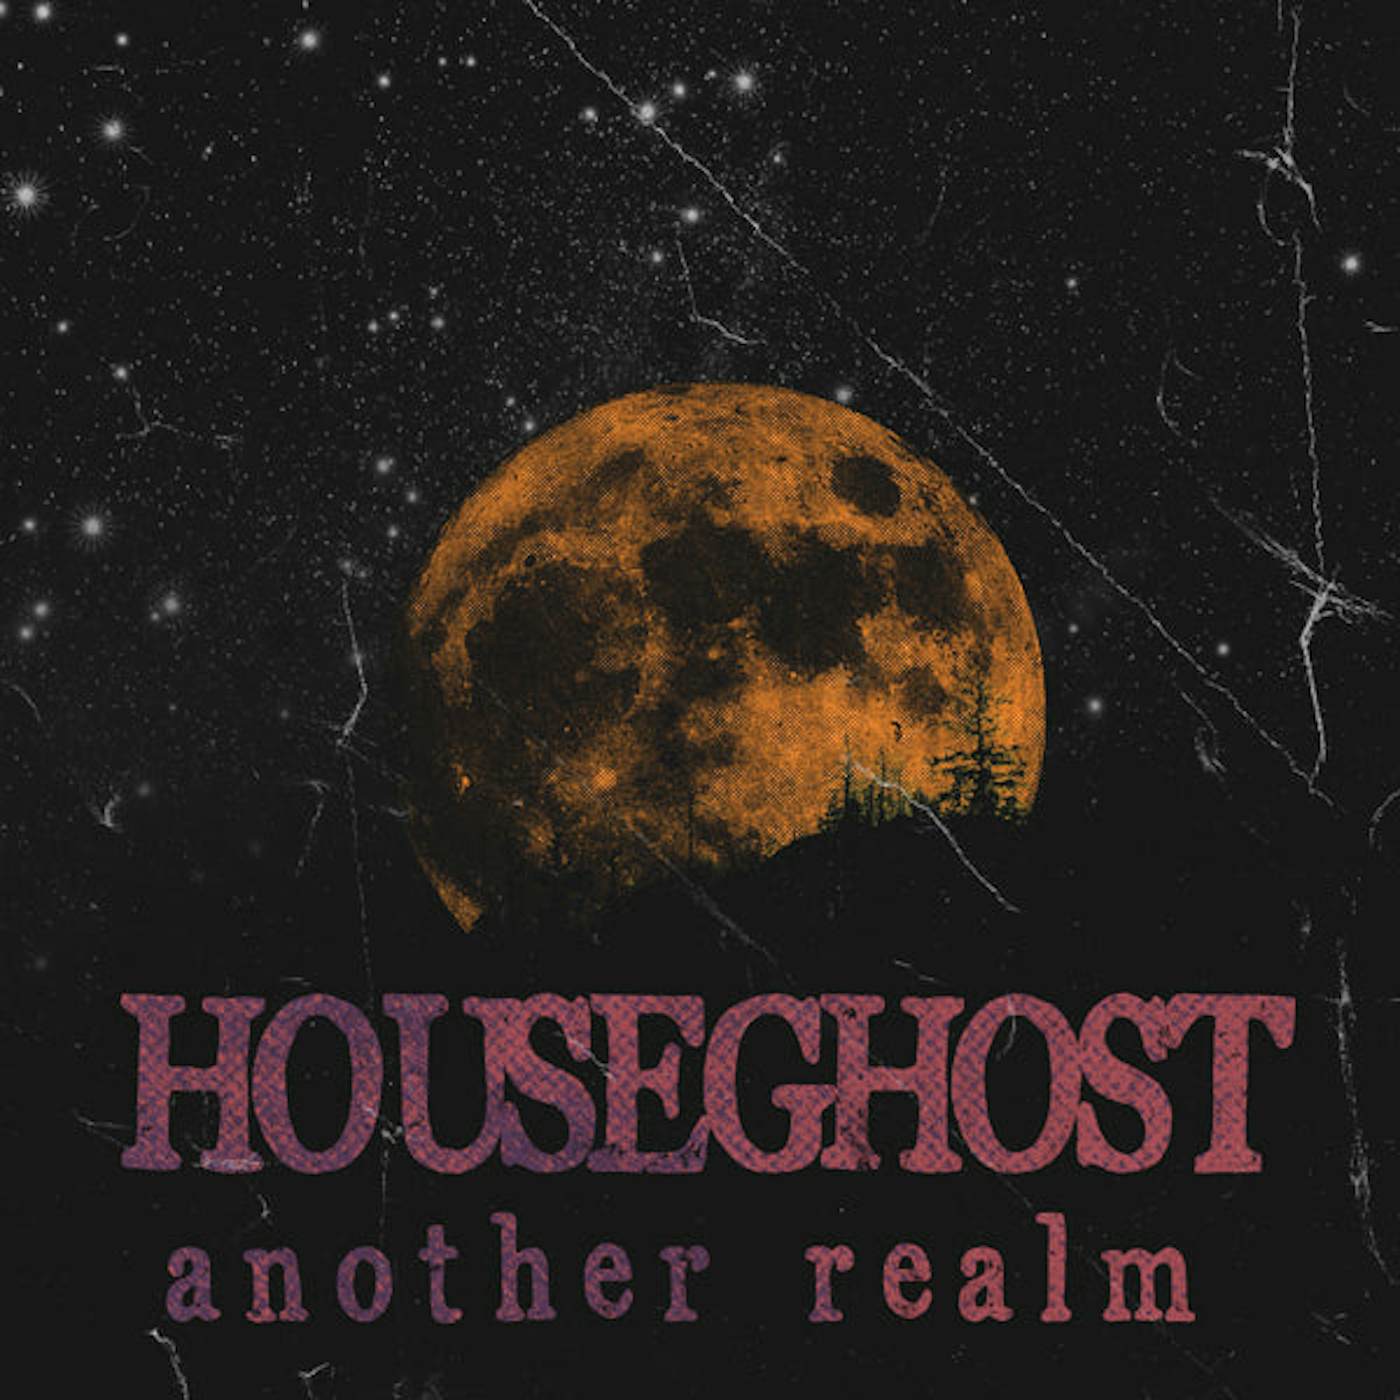 Houseghost LP - Another Realm (Vinyl)